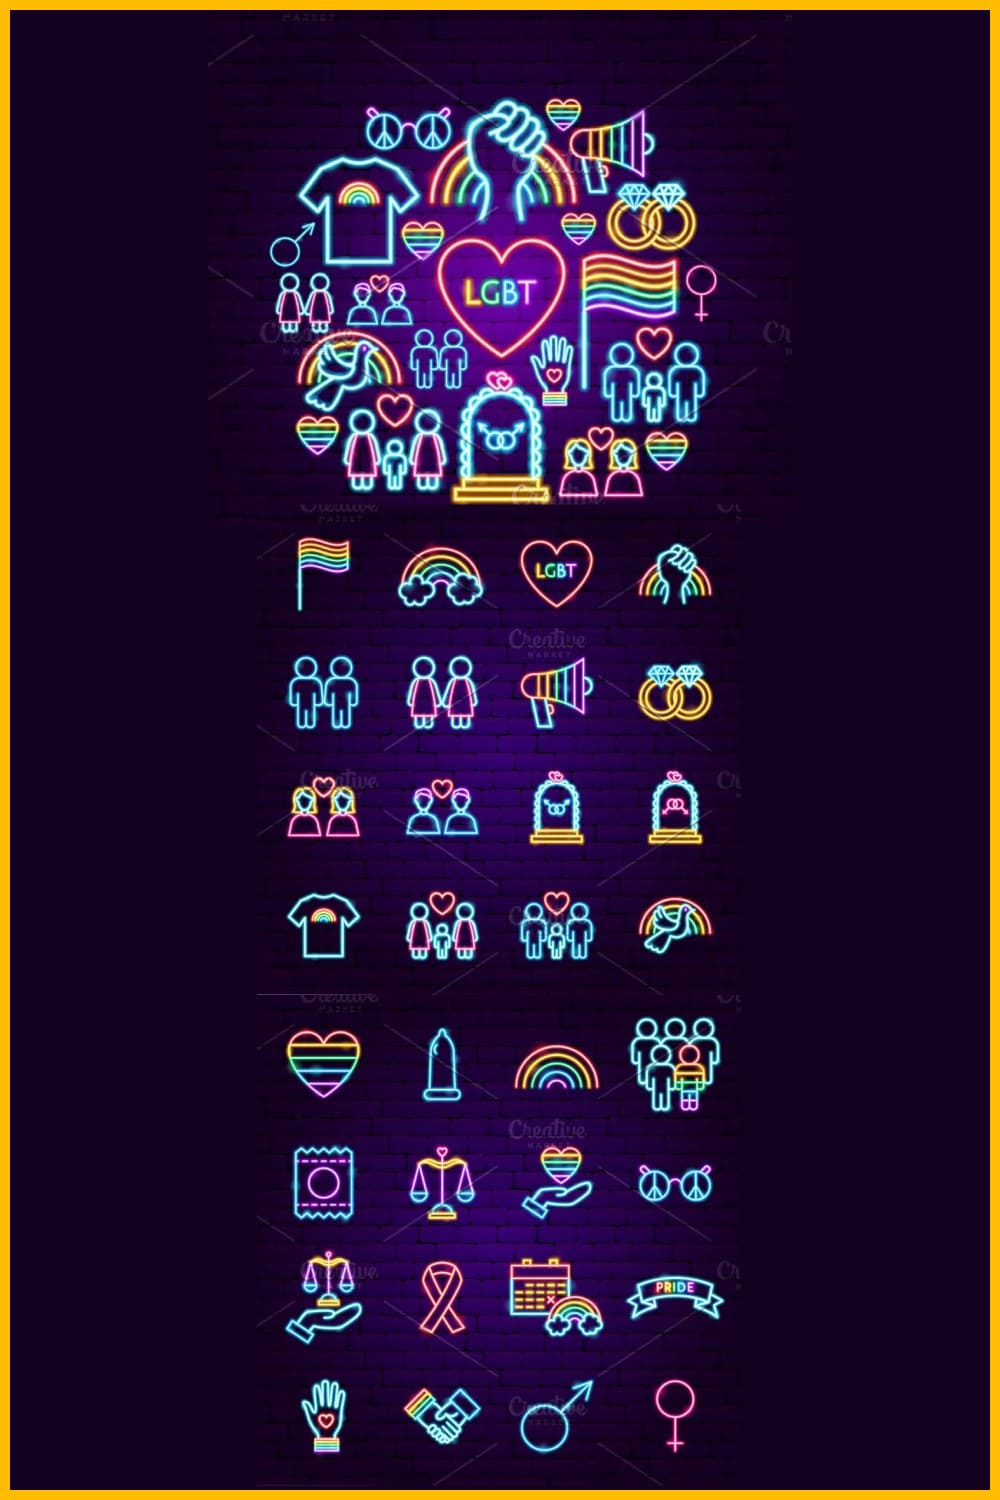 Collage of app icons in rainbow colors.